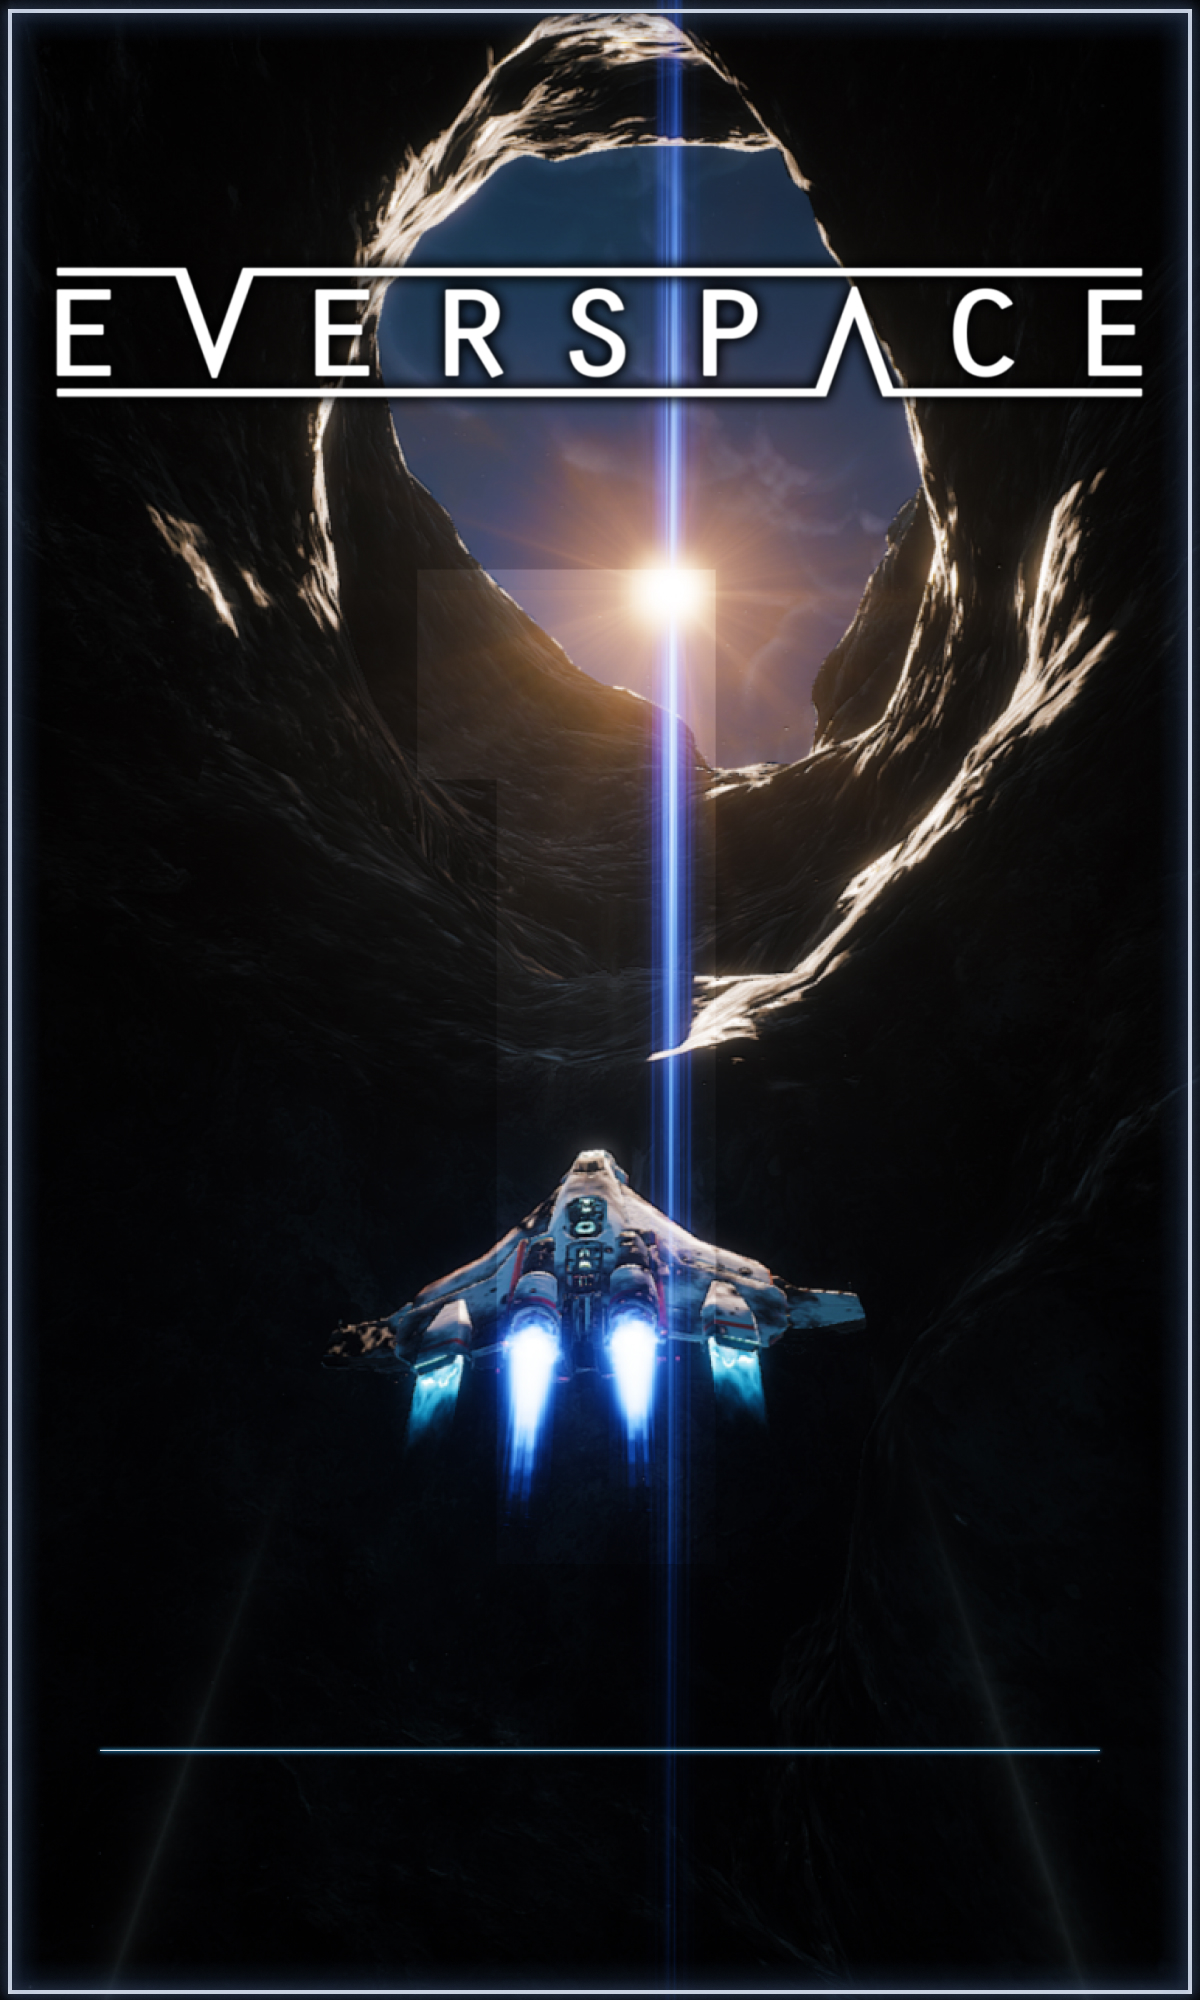 EVERSPACE 2 free downloads